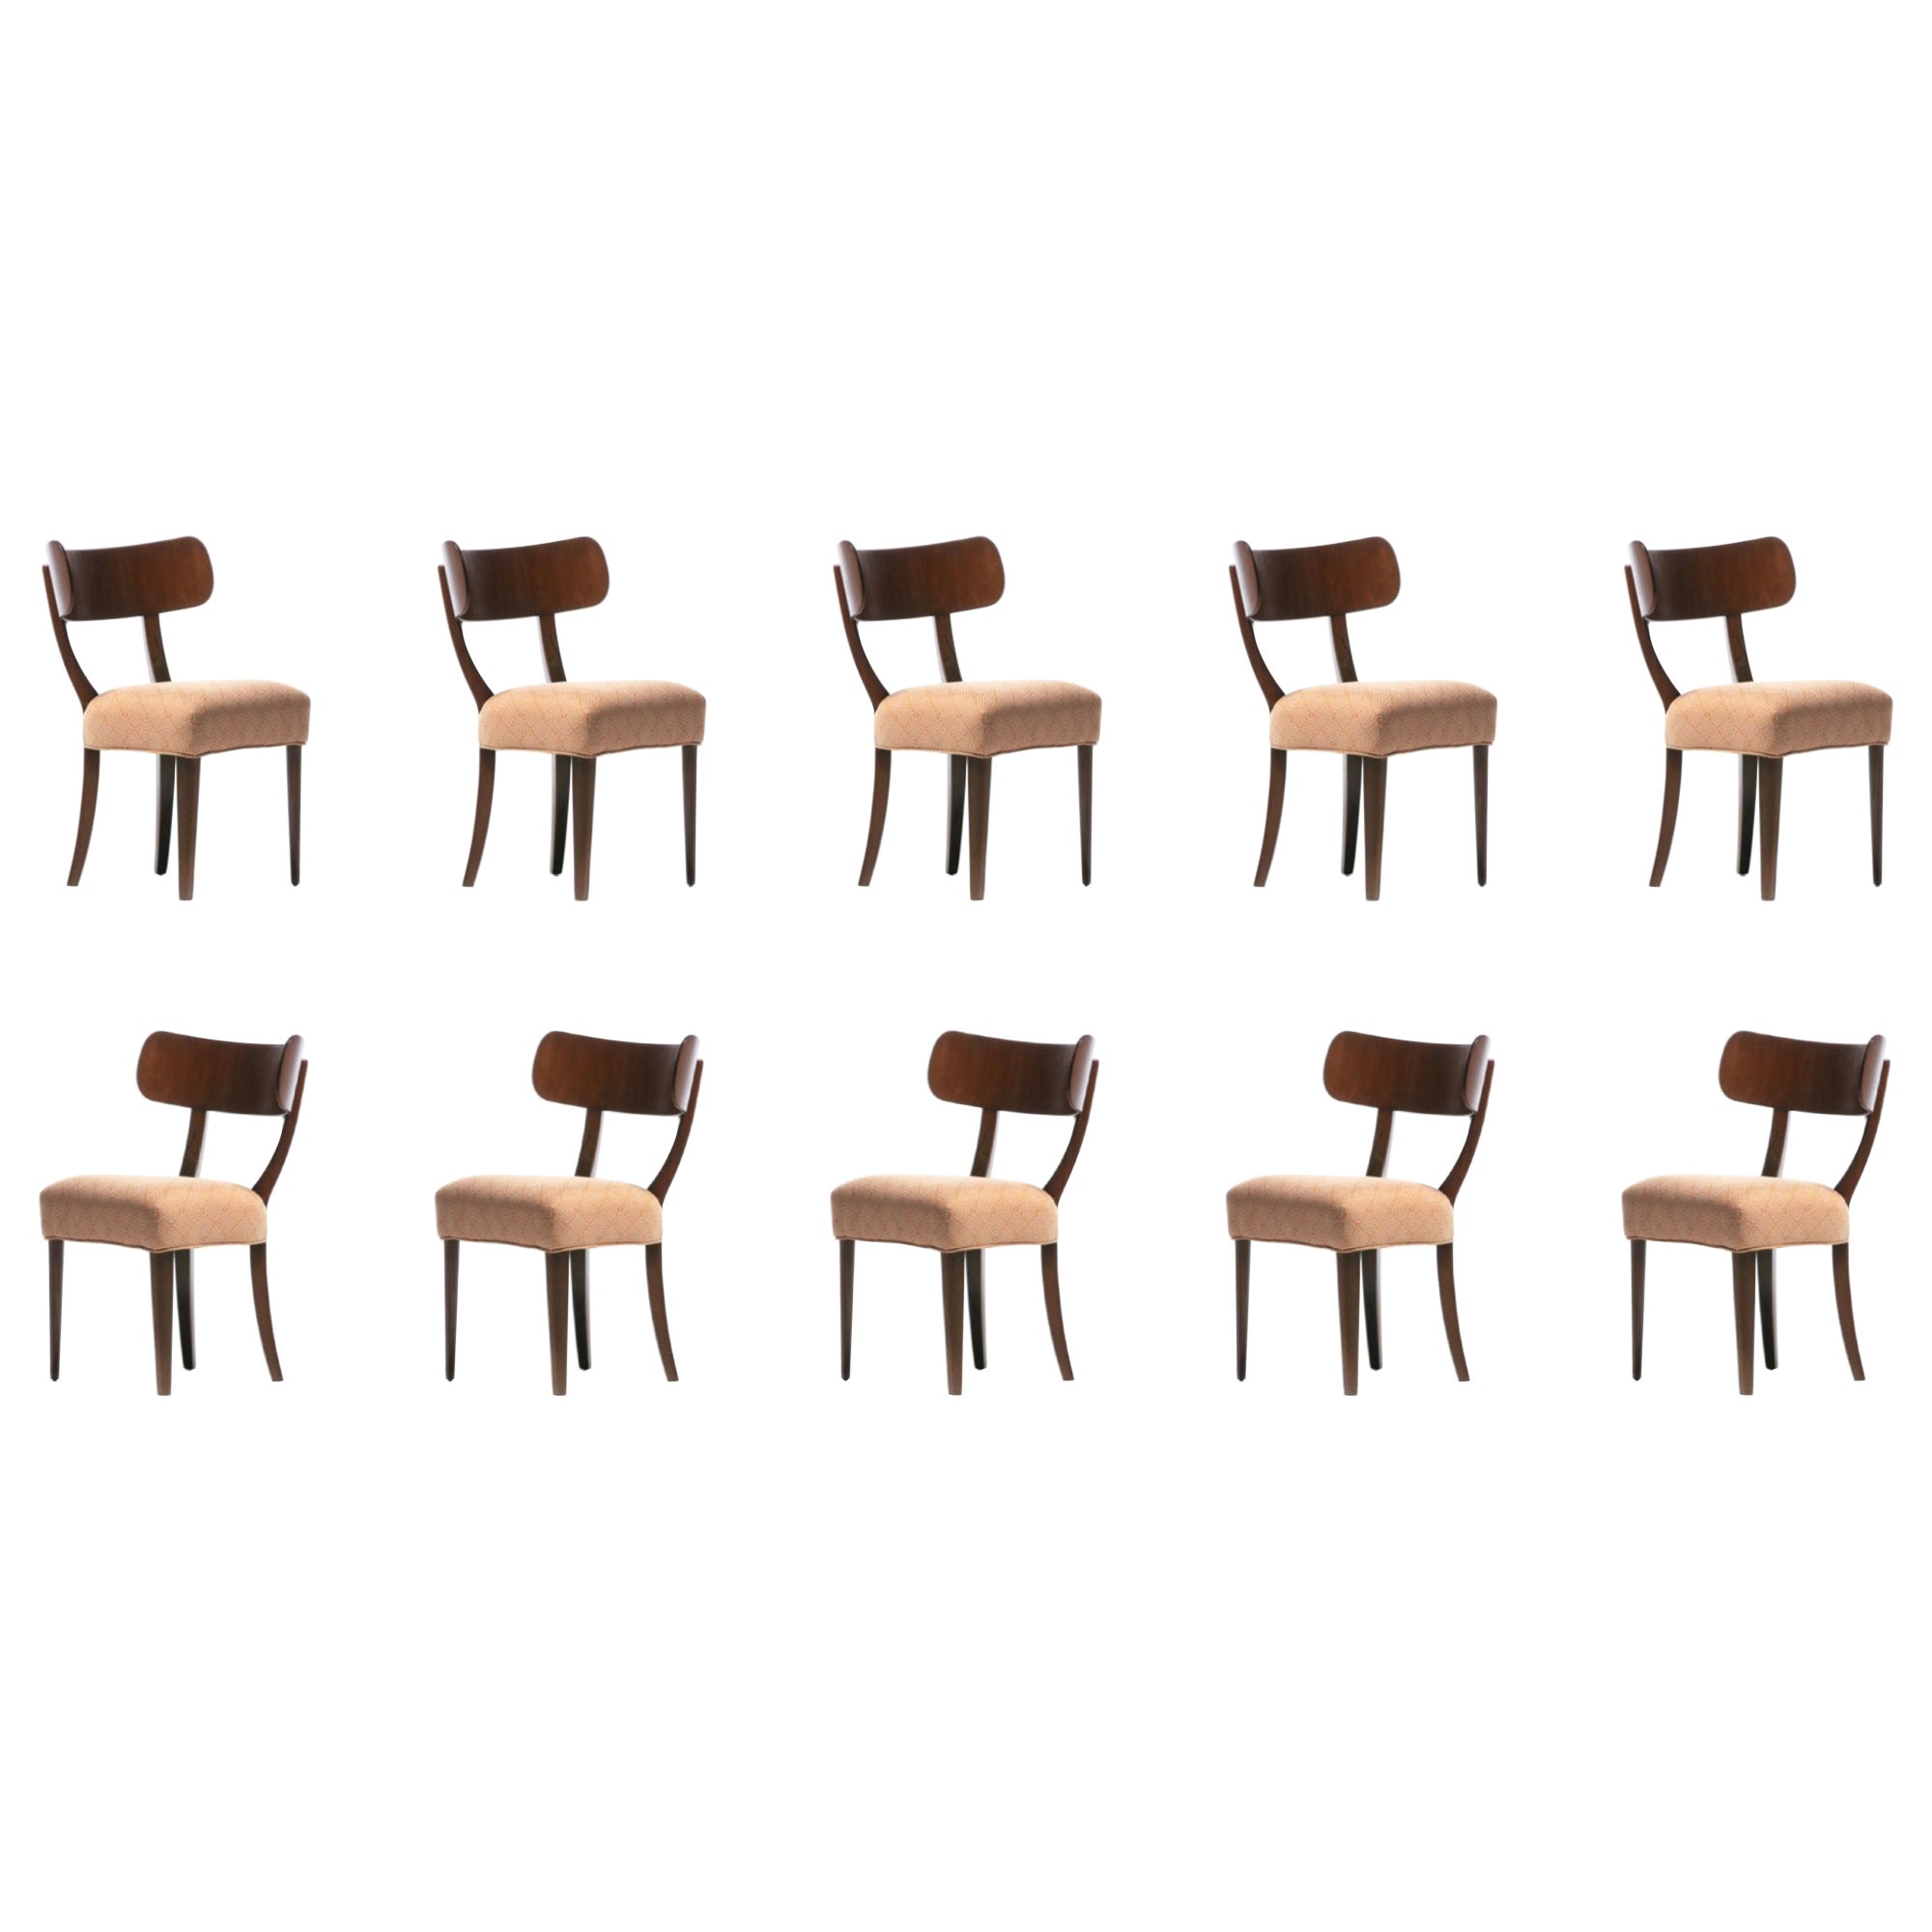 Set of Ten Klismos Dining Chairs by Carl Malmsten for Widdicomb, circa 1940 For Sale